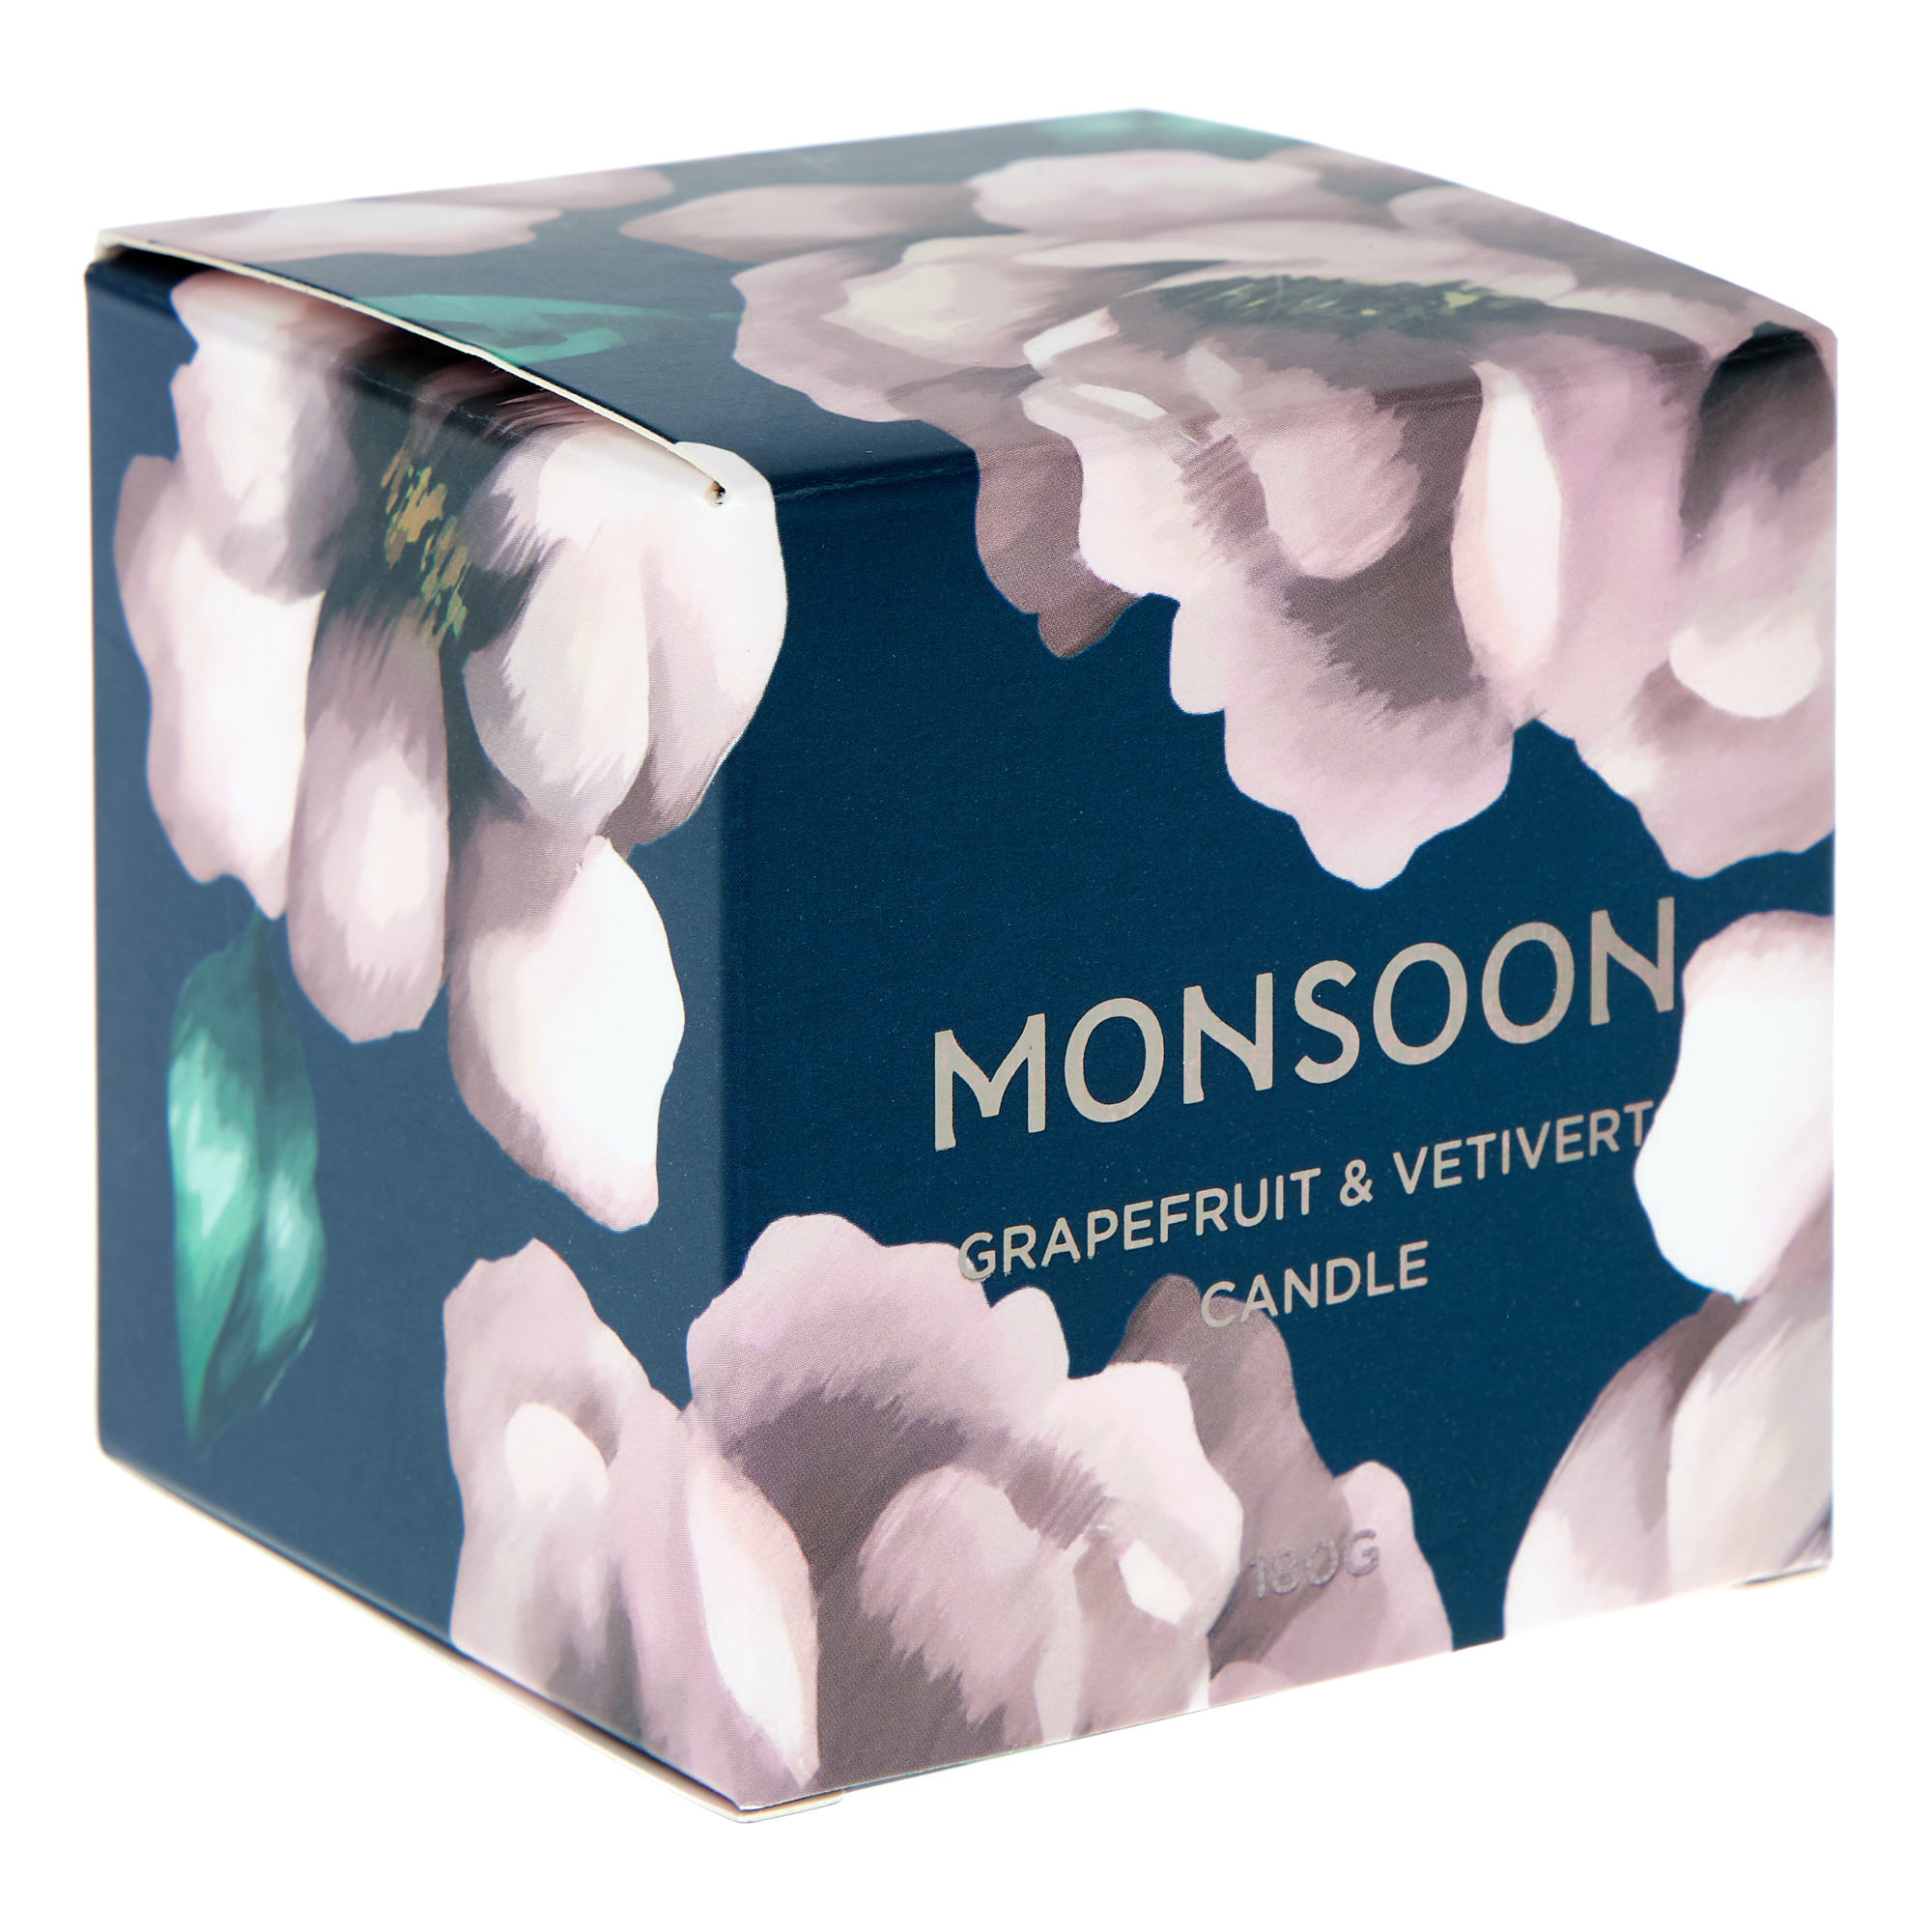 Monsoon Grapefruit & Vetiver Scented Candle 180g